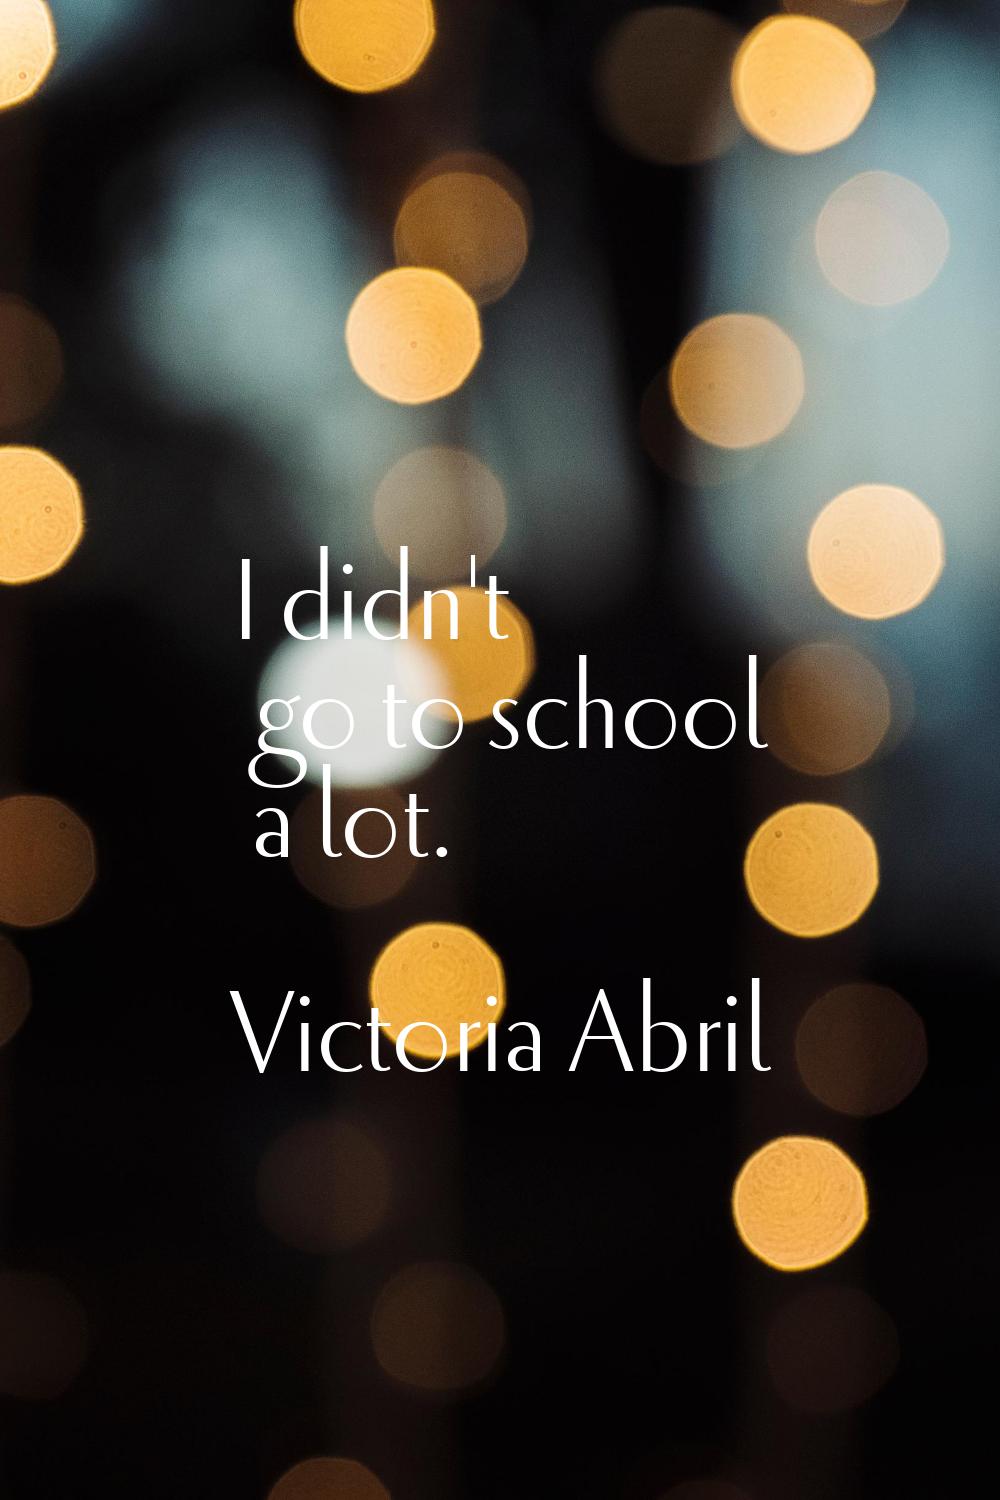 I didn't go to school a lot.